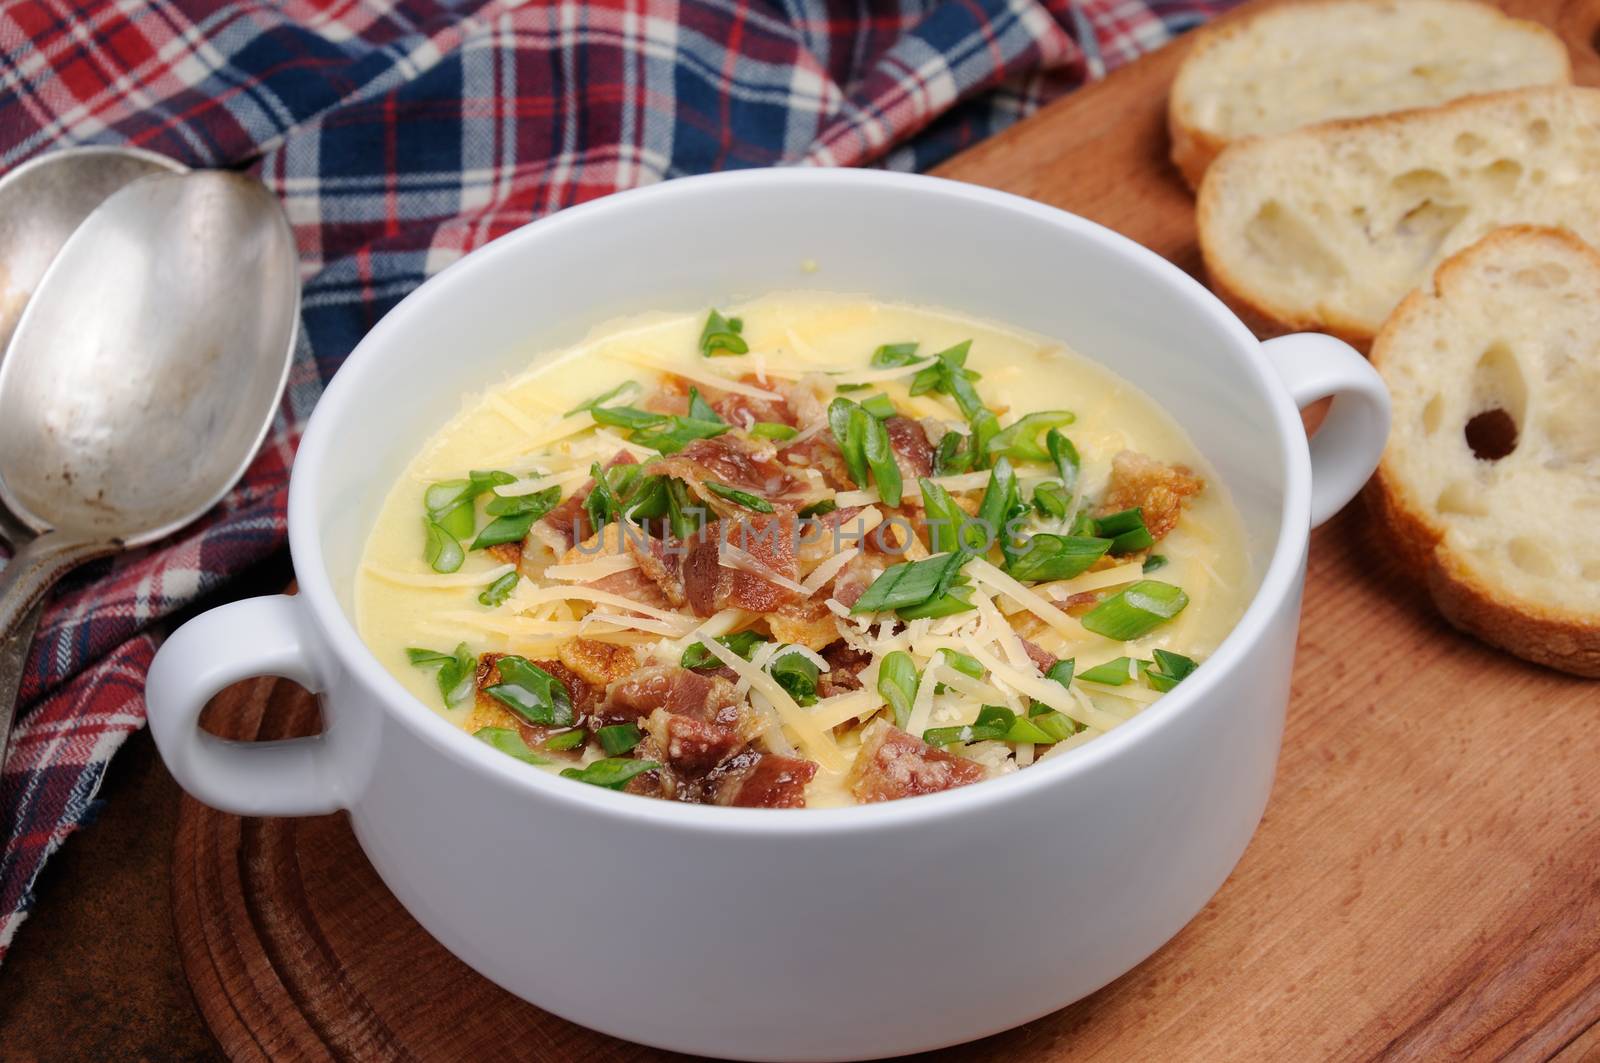 Creamy Loaded Baked Potato Soup with Bacon and Cheese,green onions